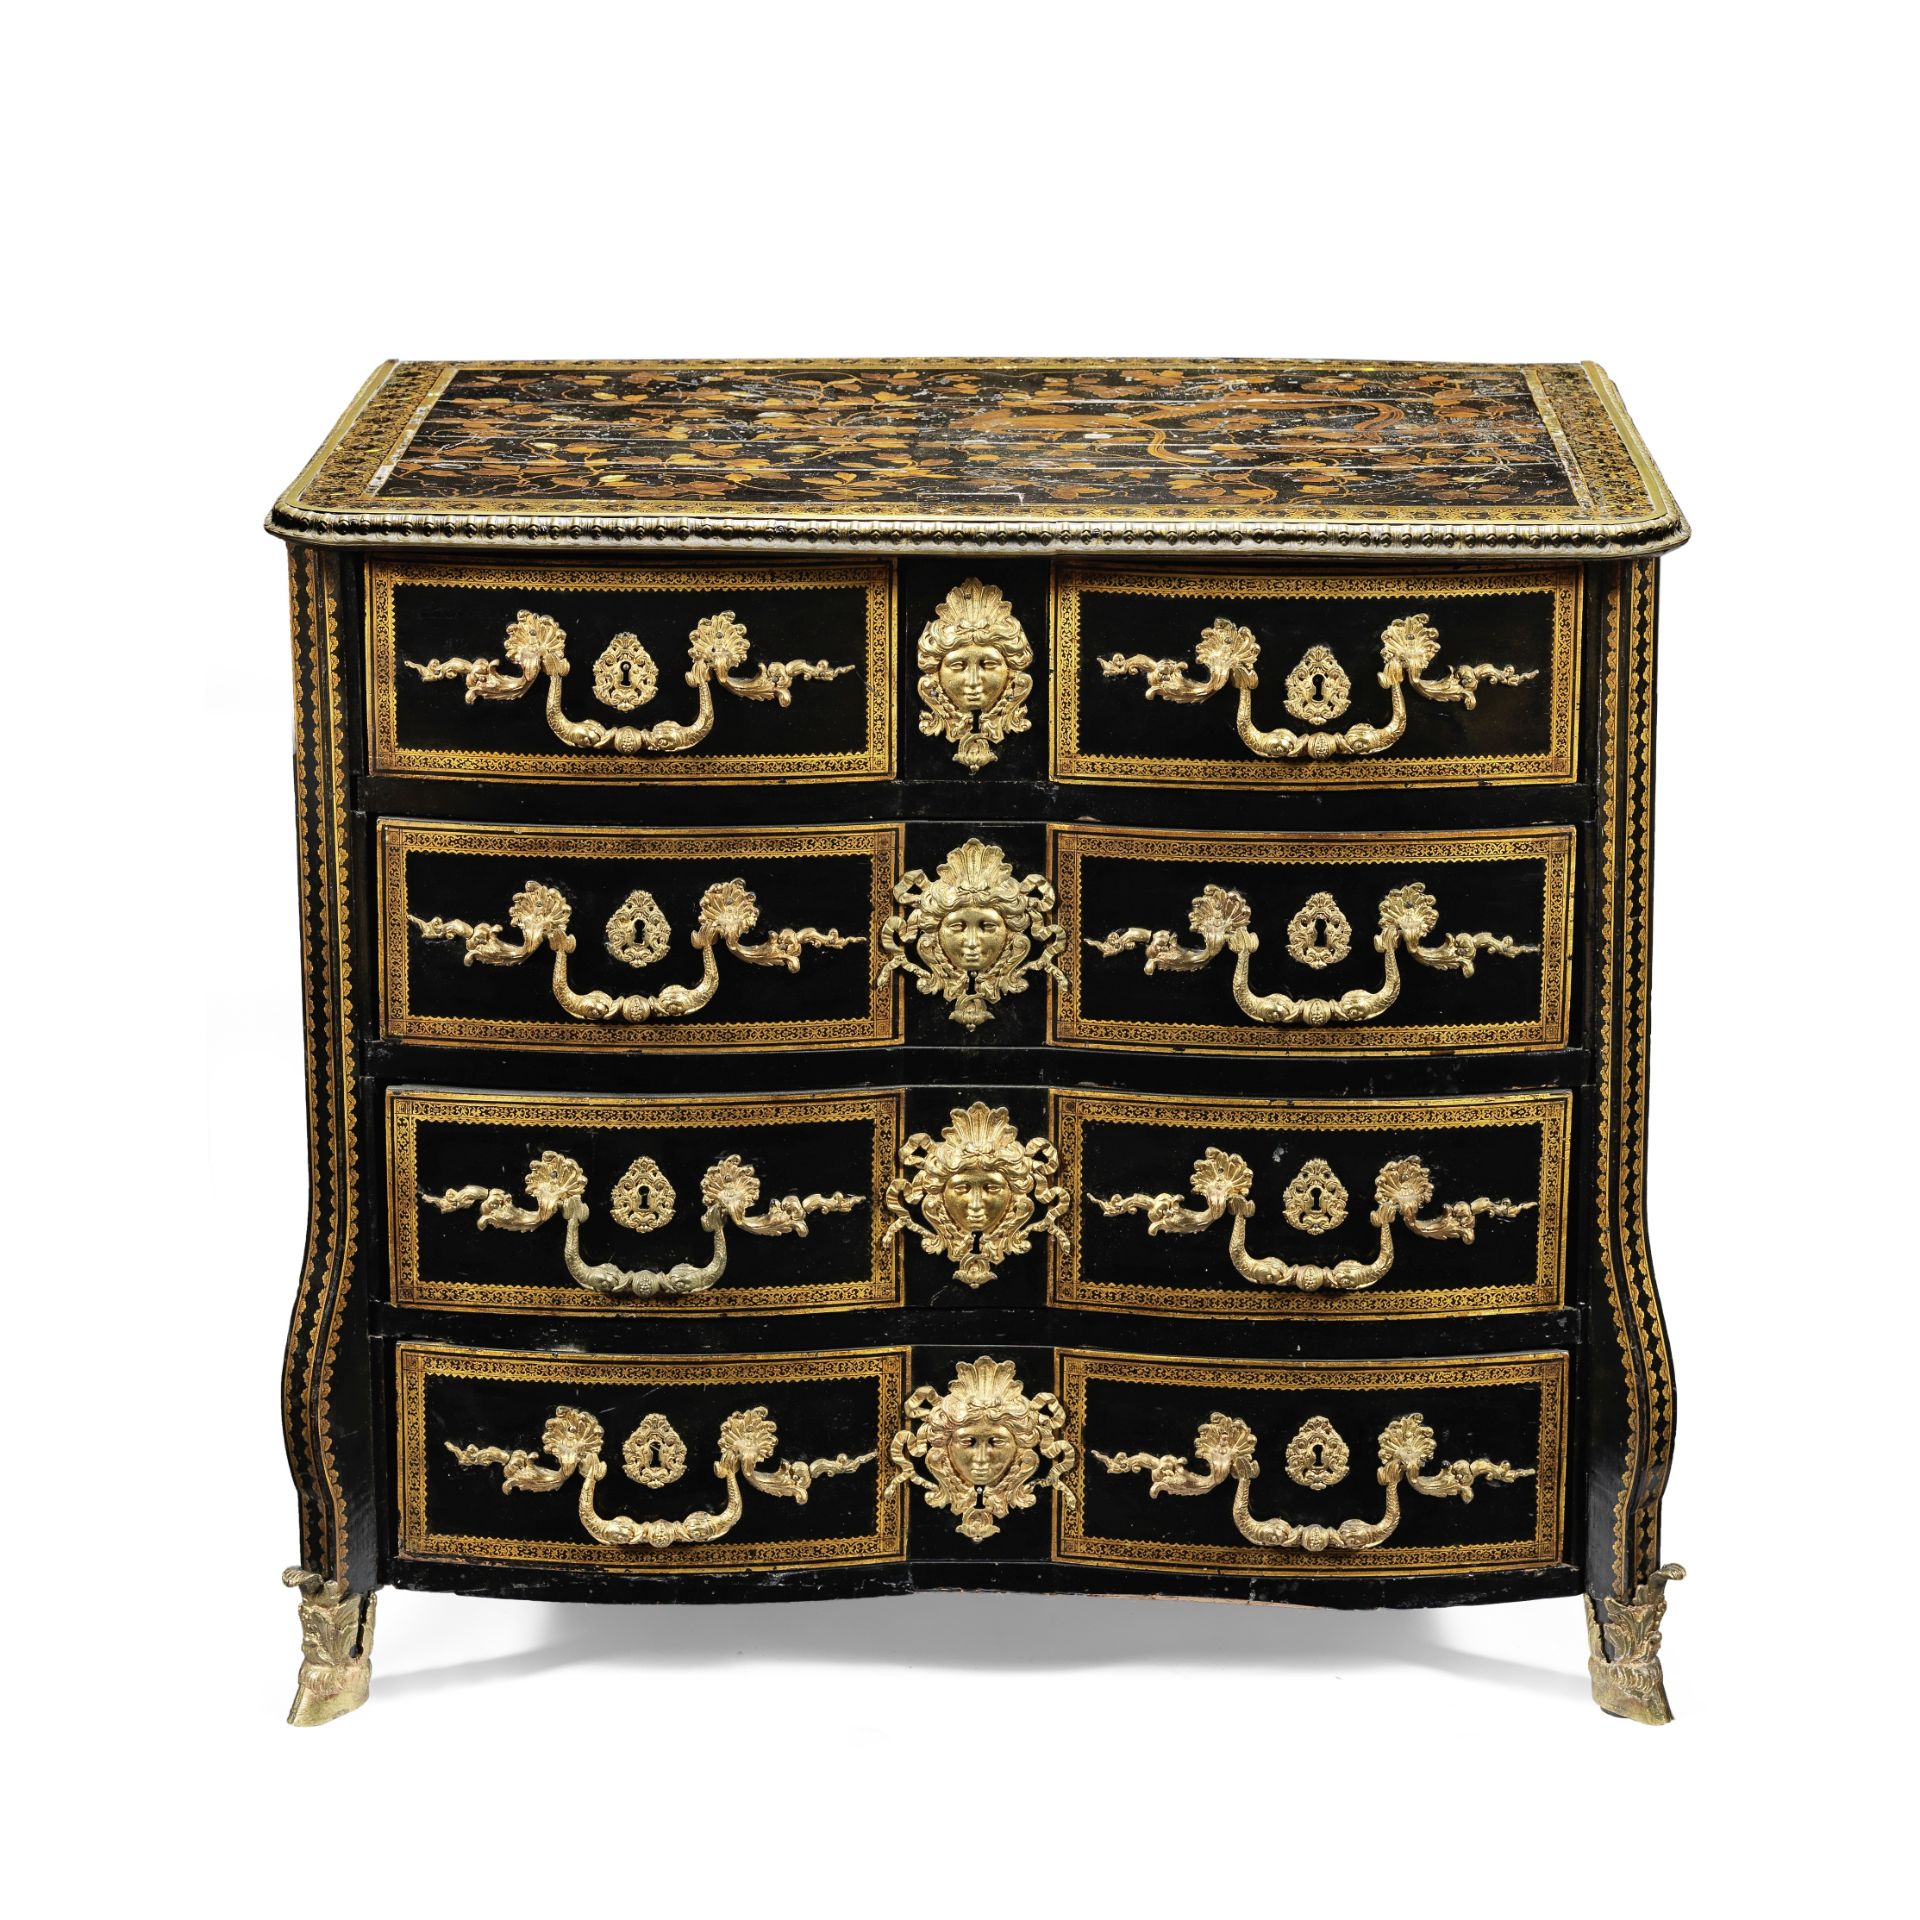 A Louis XIV Black-Lacquer, mother of pearl inlaid and Gilt bronze mounted commode